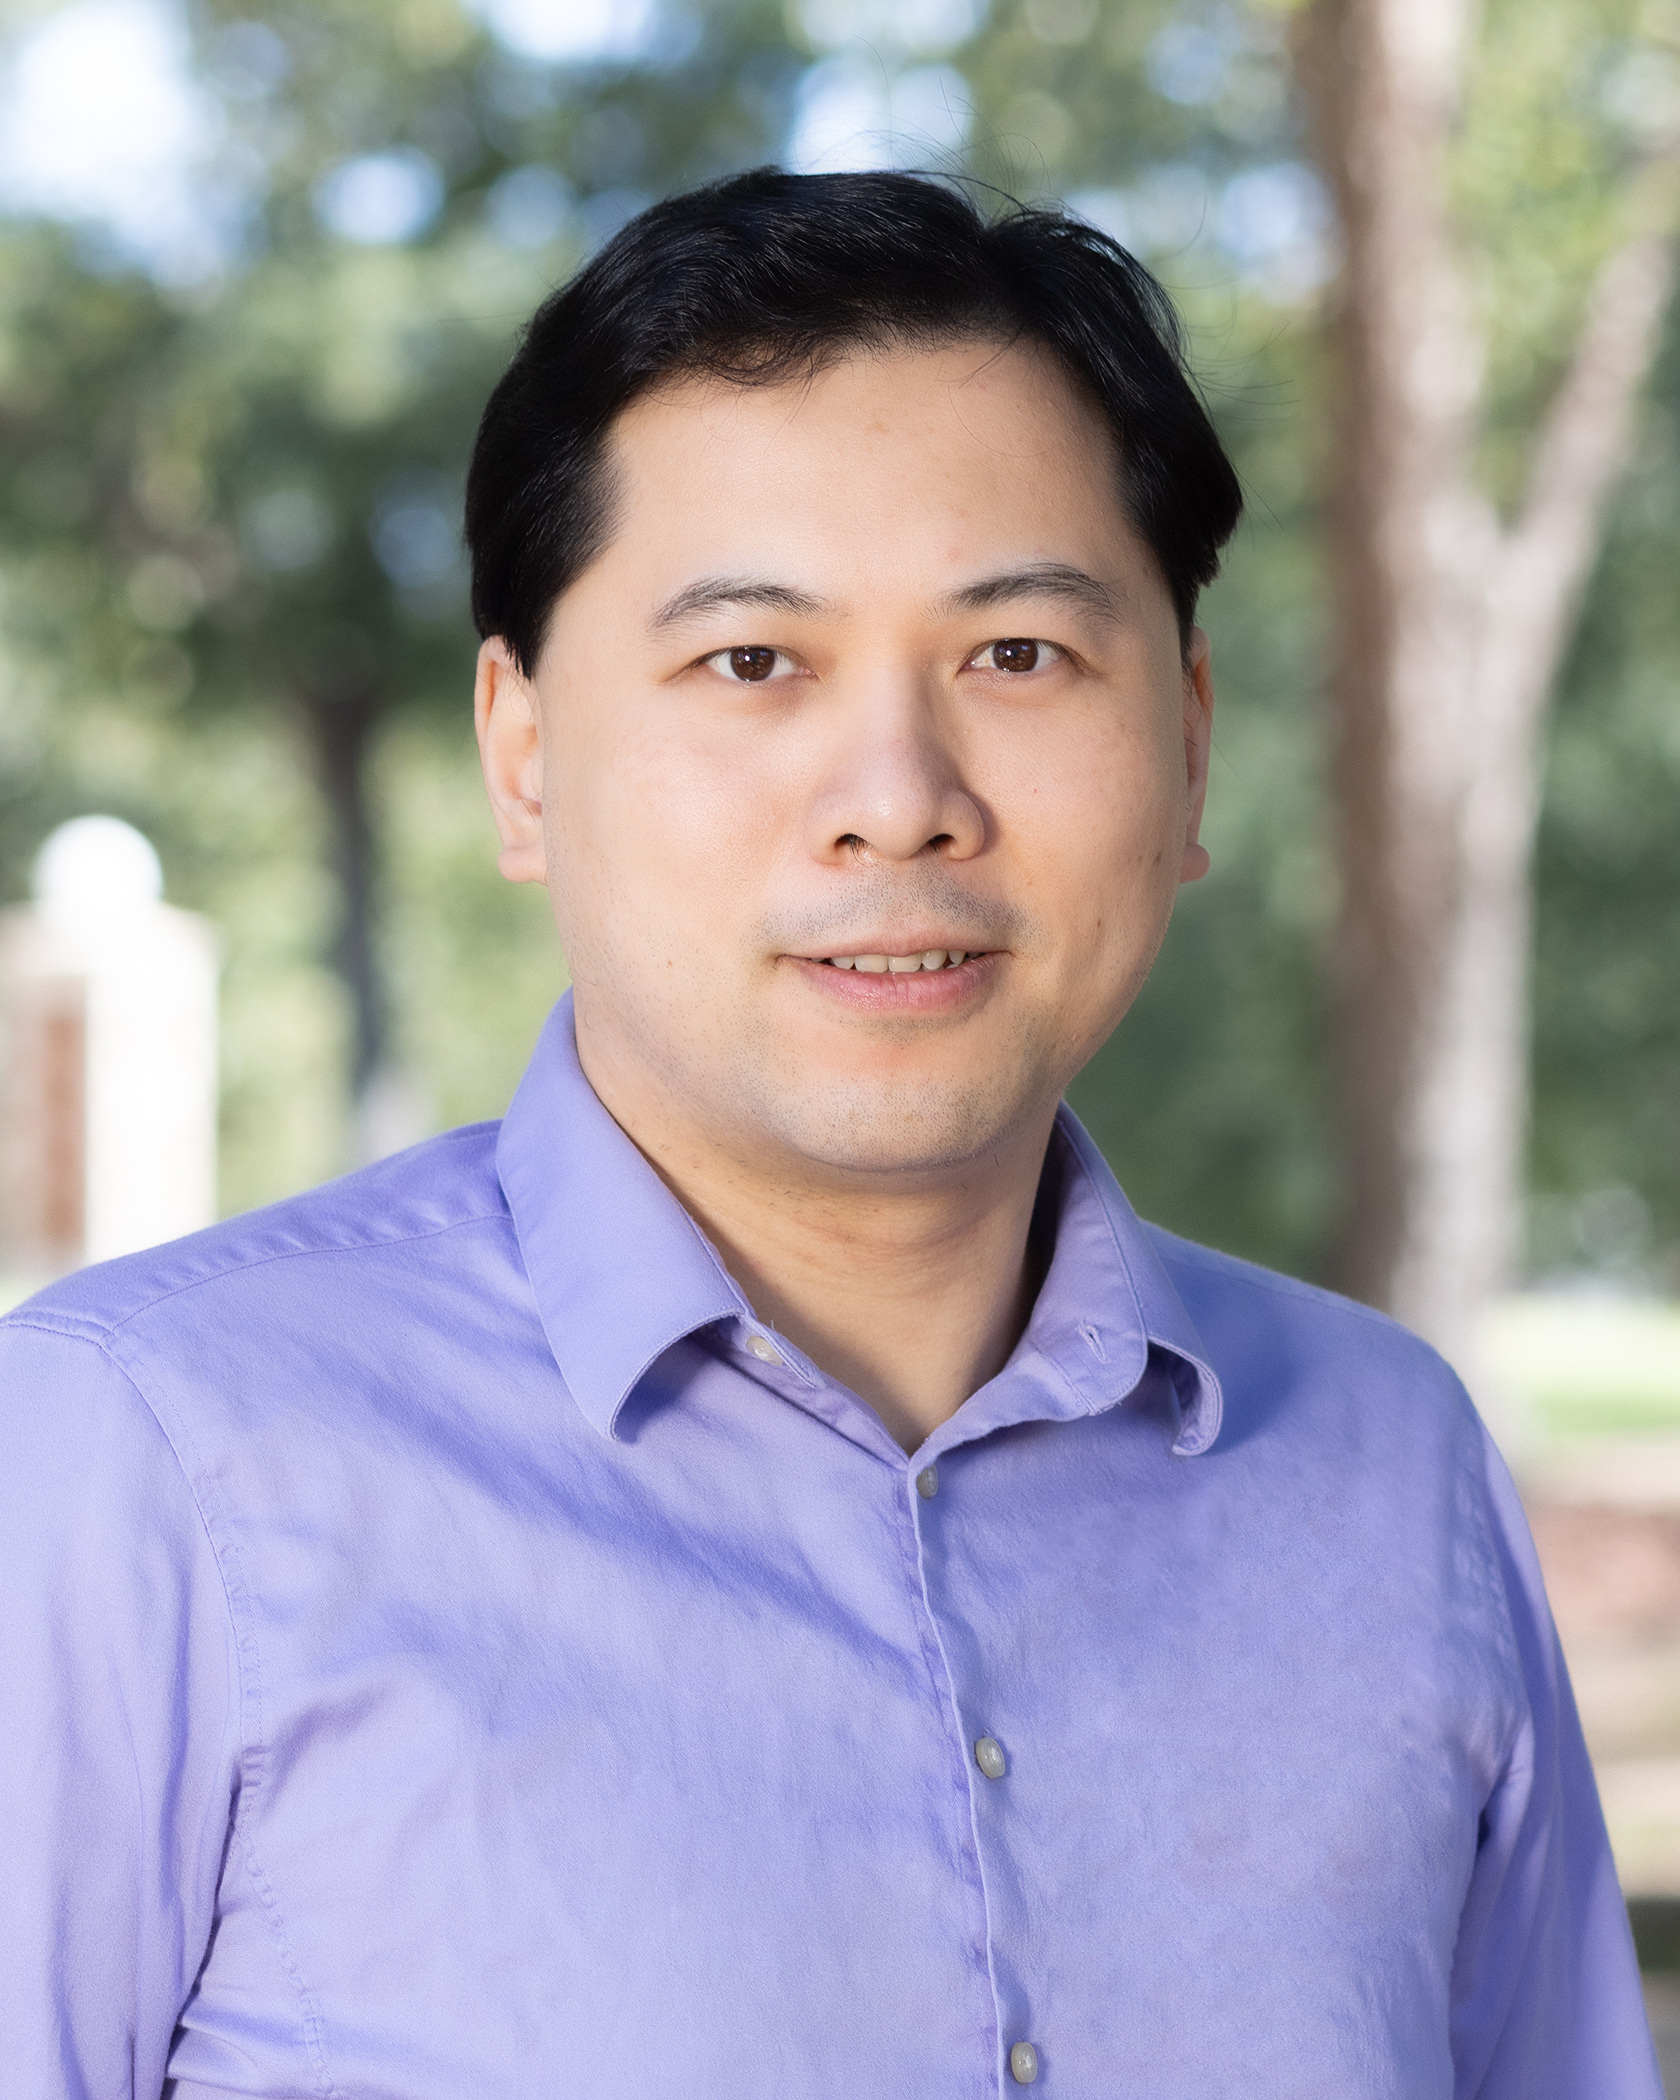 Ken Qui is a Assistant Professor of Finance at the Else School of Management at Millsaps College.